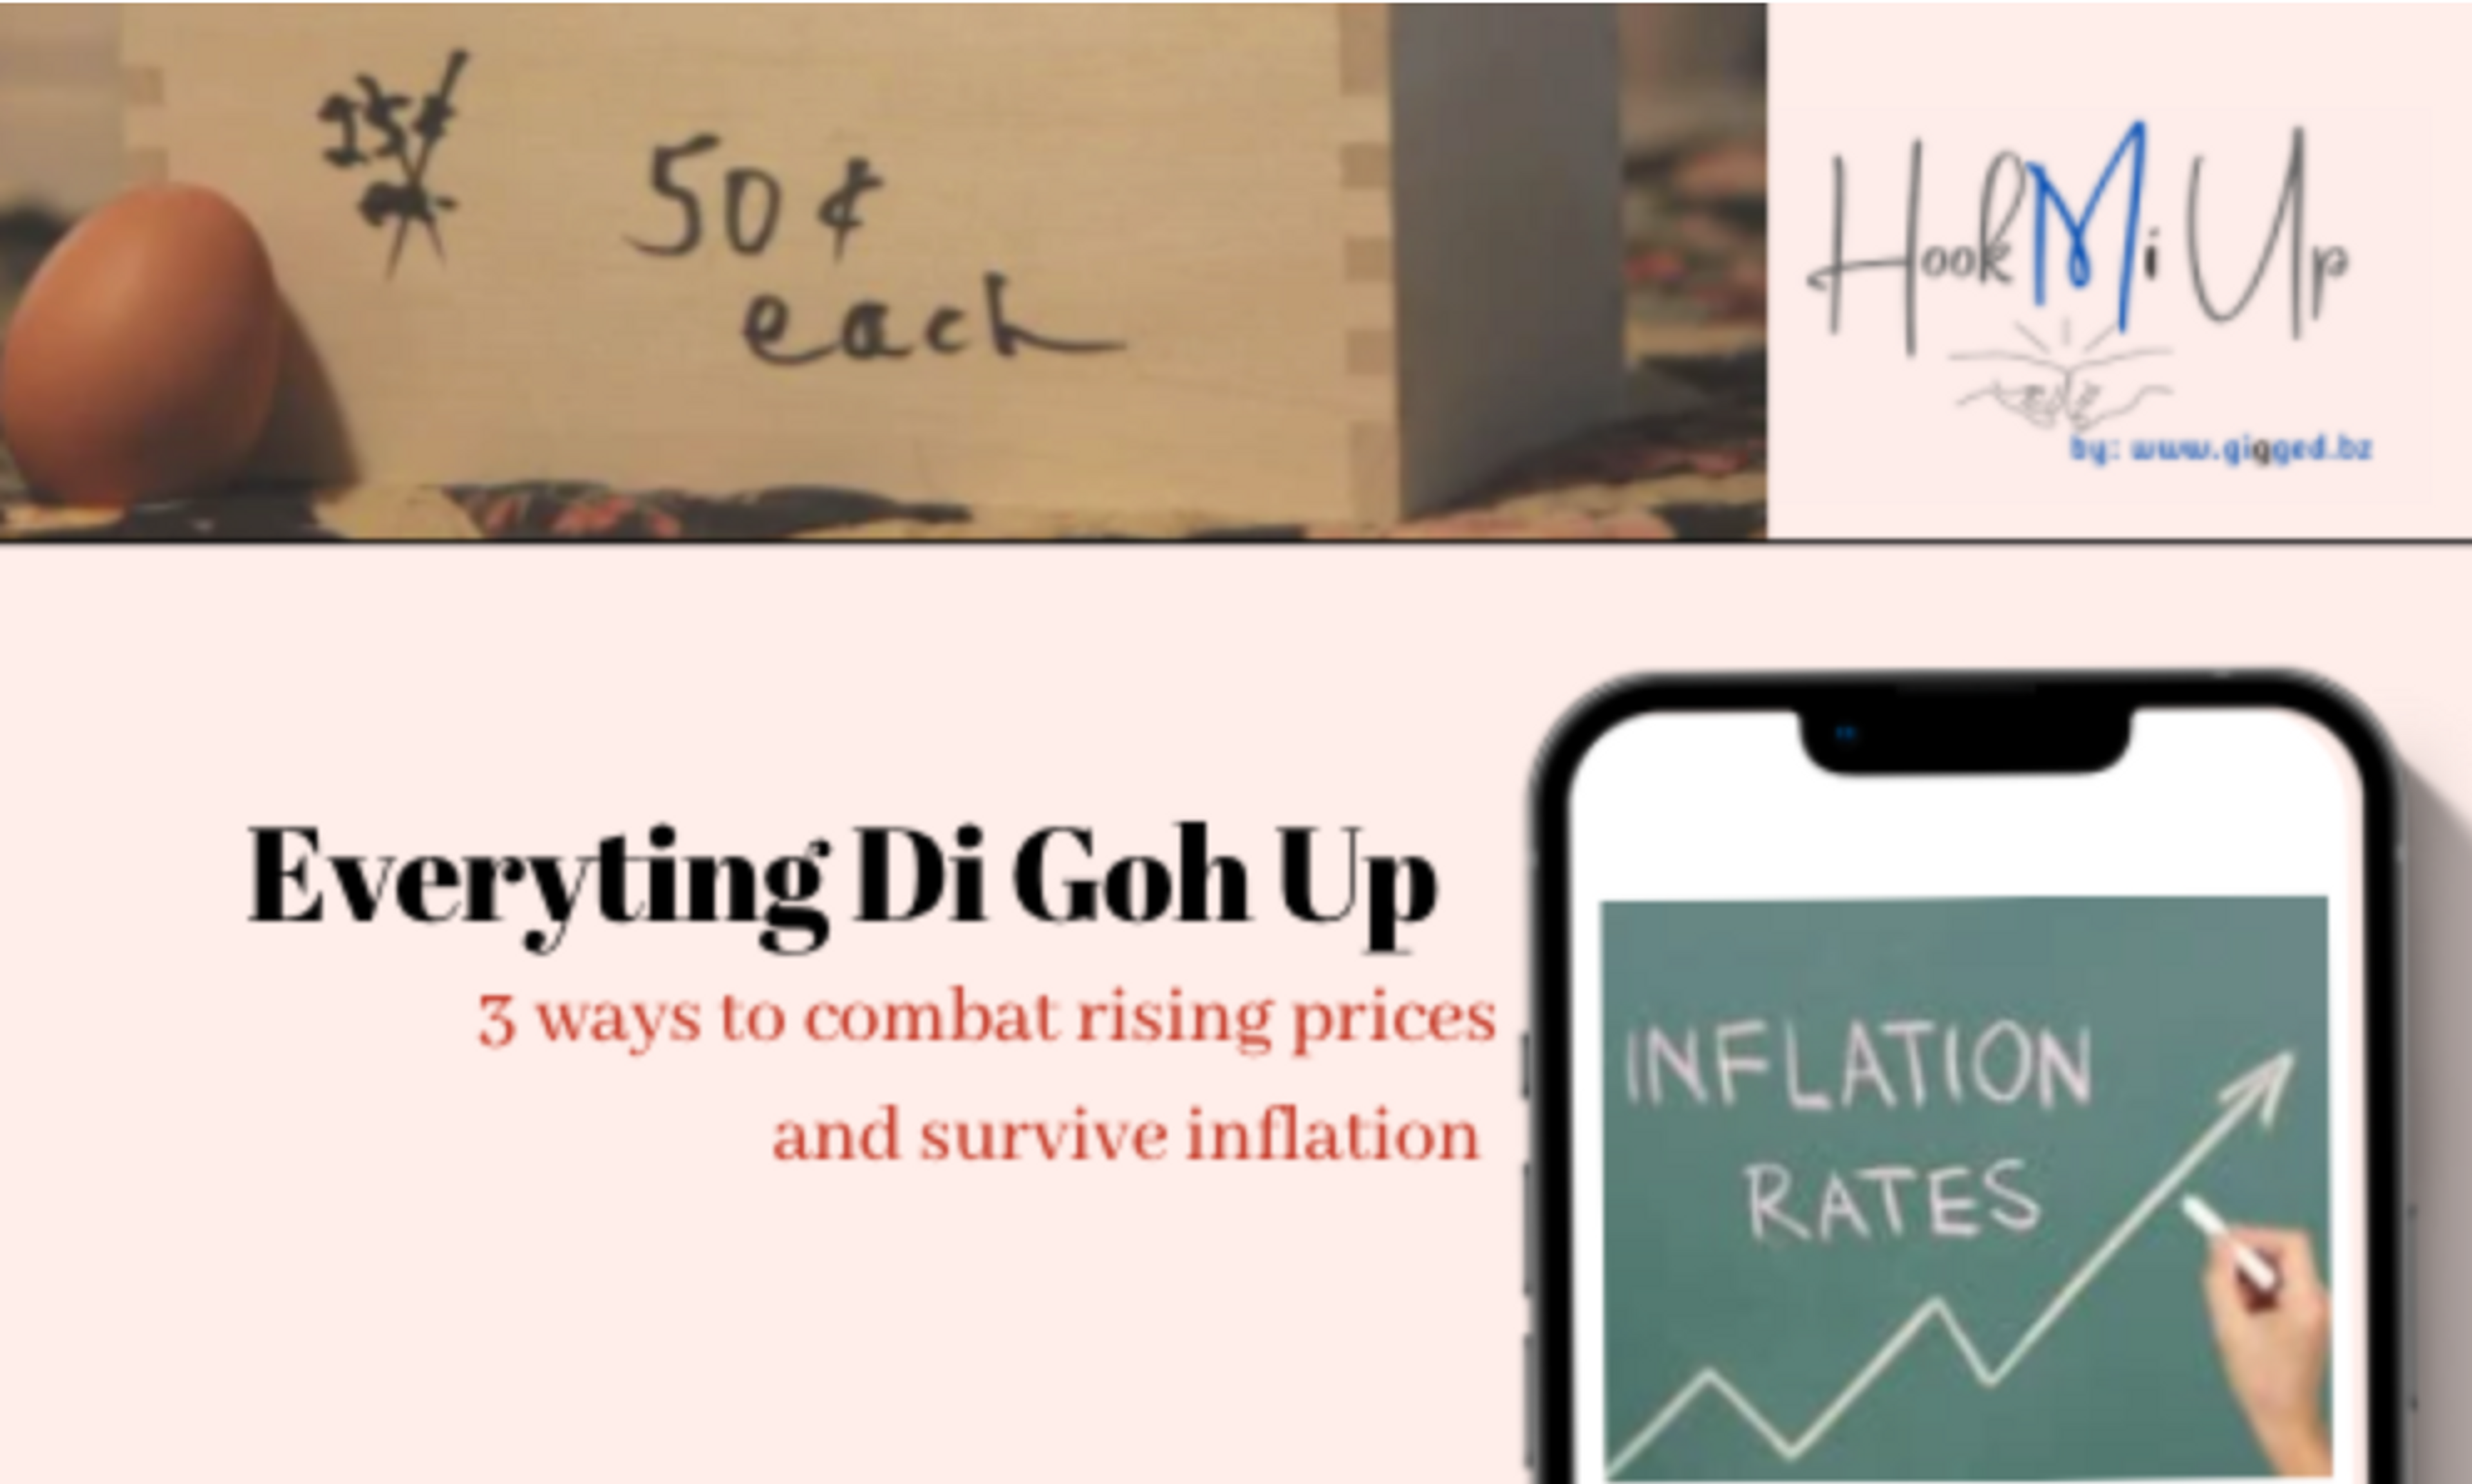 3 ways to combat rising prices and survive inflation